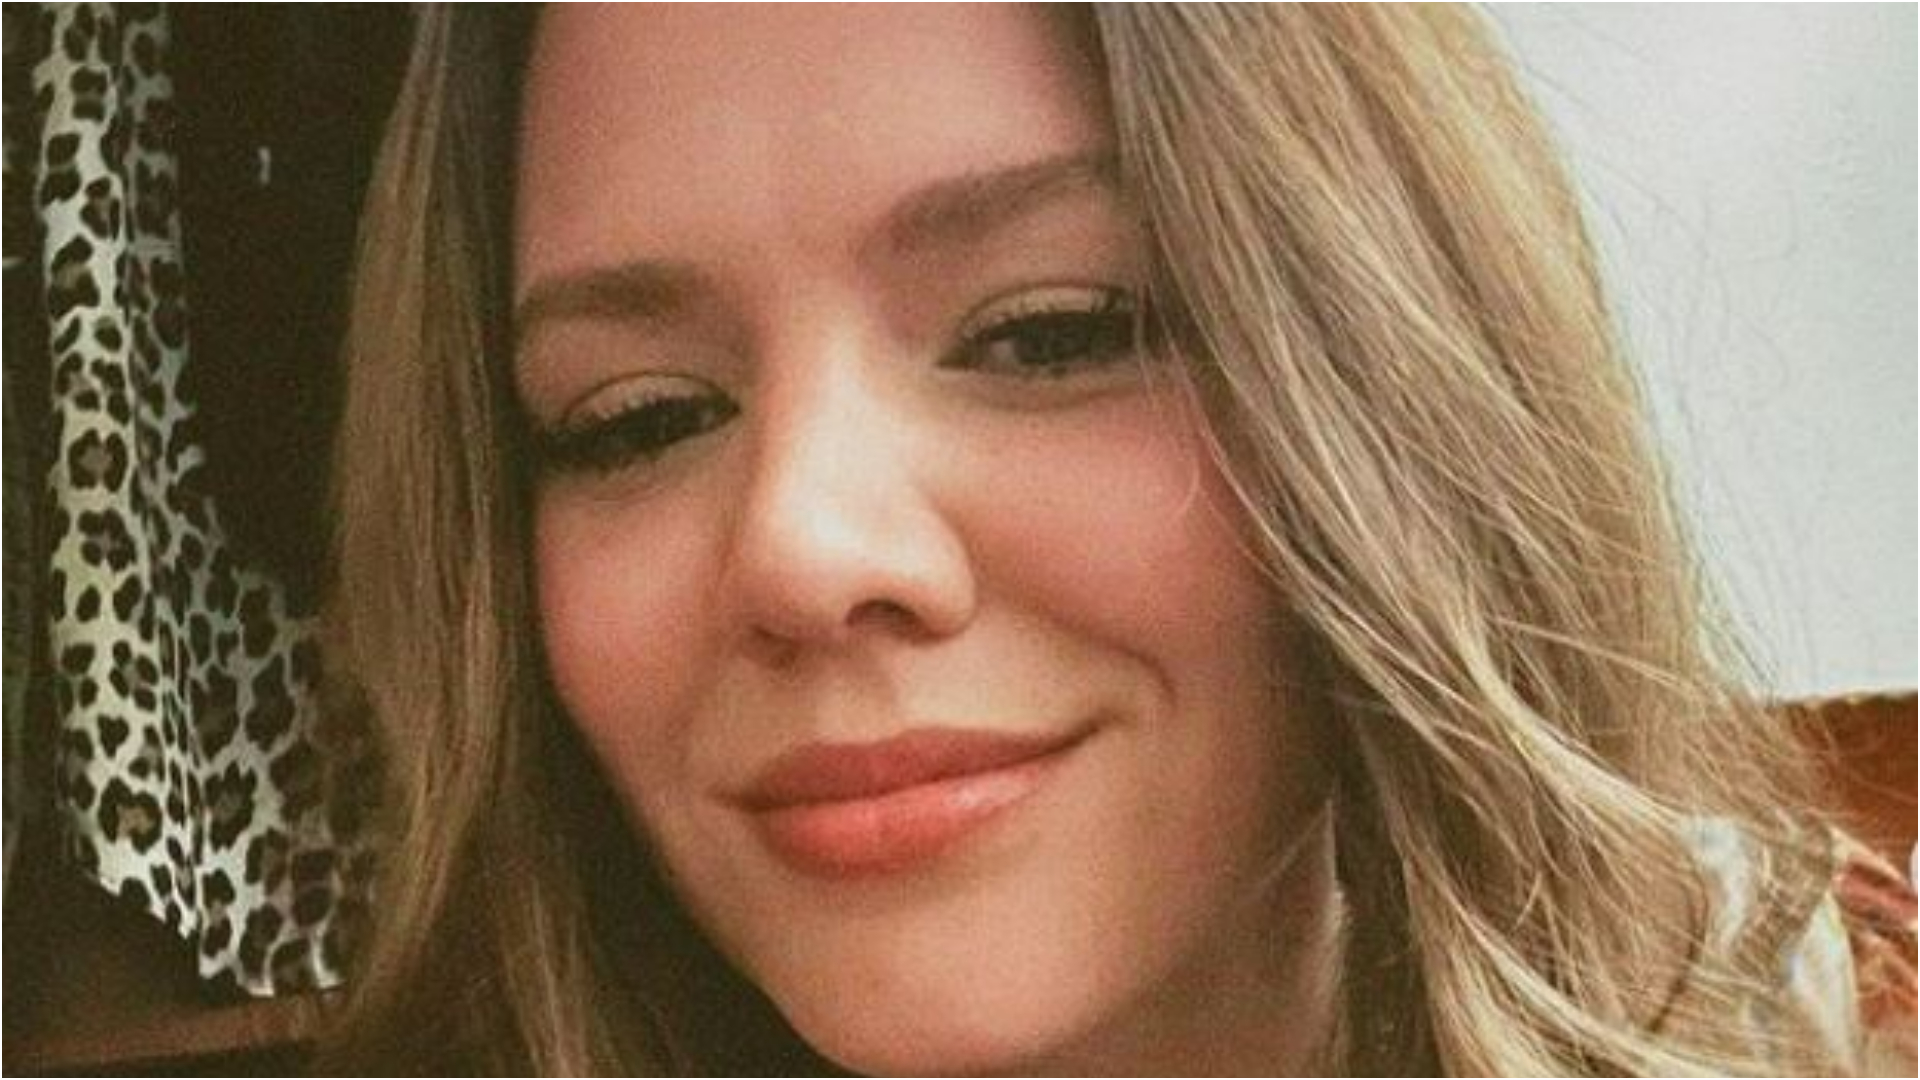 Joy, a member of Jesse & Joy, could not hold back her tears after the wave of femicide in Mexico (Photo: @joy/Instagram)